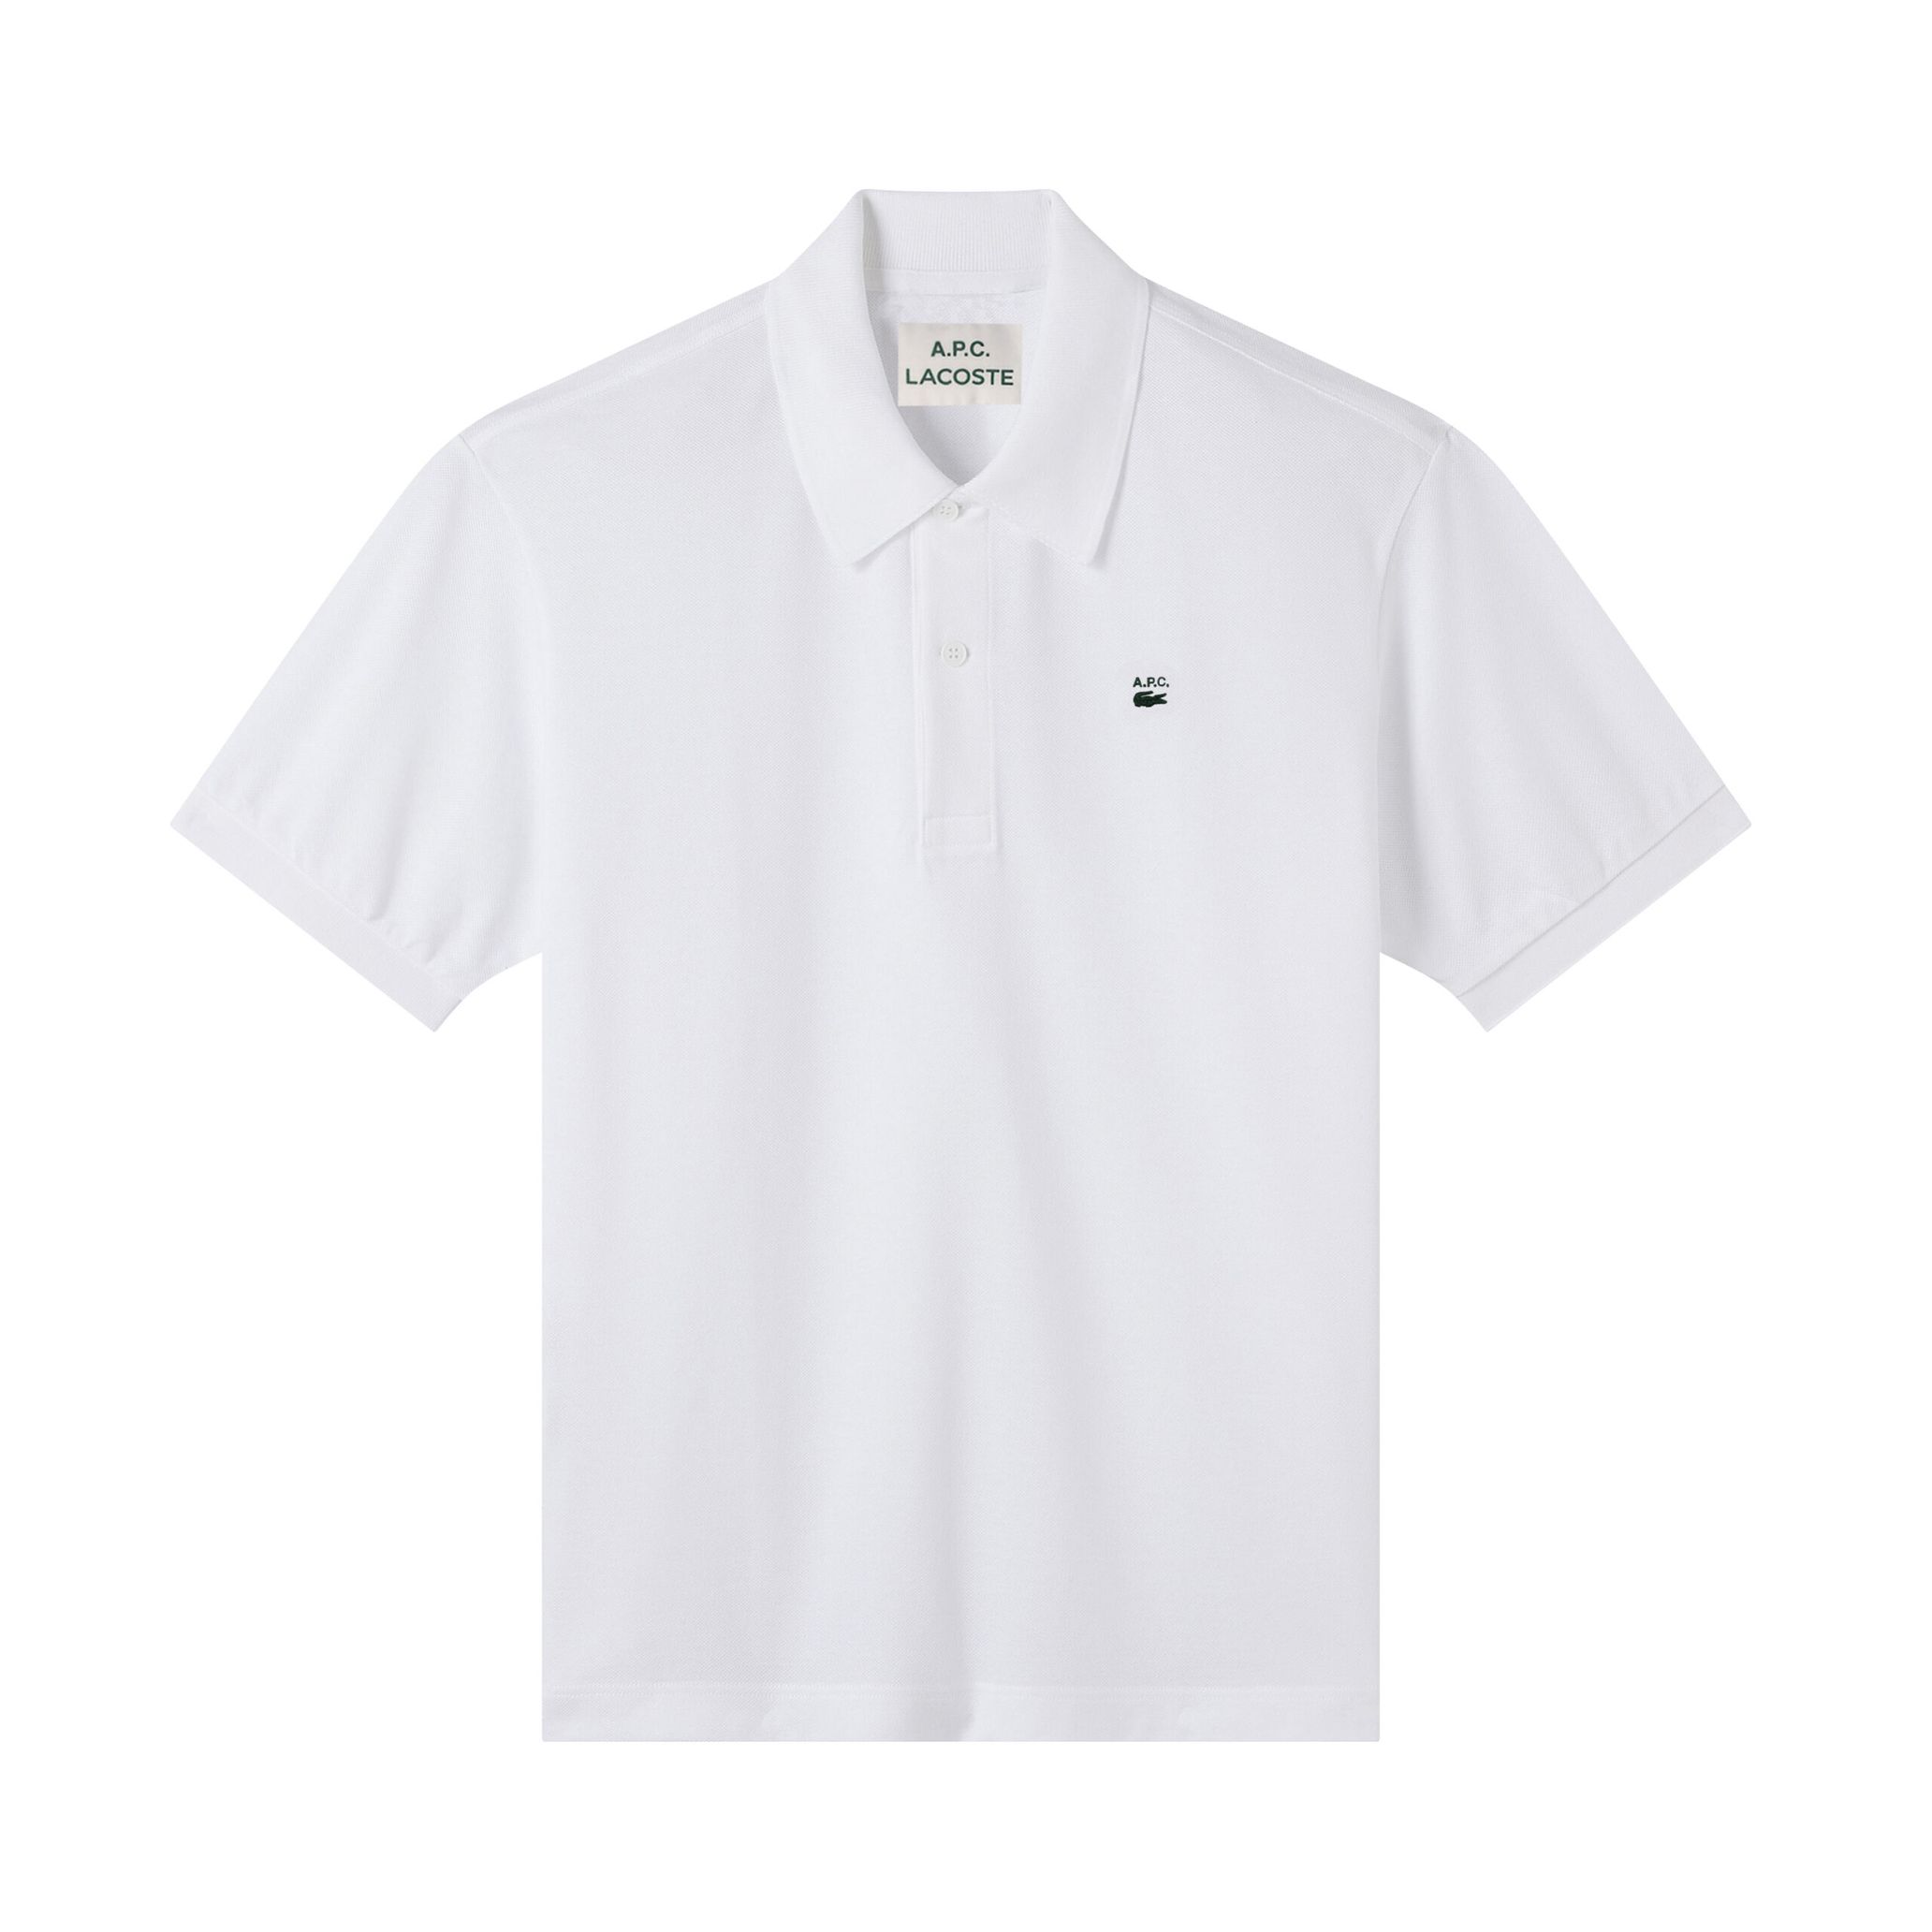 A.P.C. x LACOSTE コラボ半袖 ポロシャツ トップス ポロシャツ